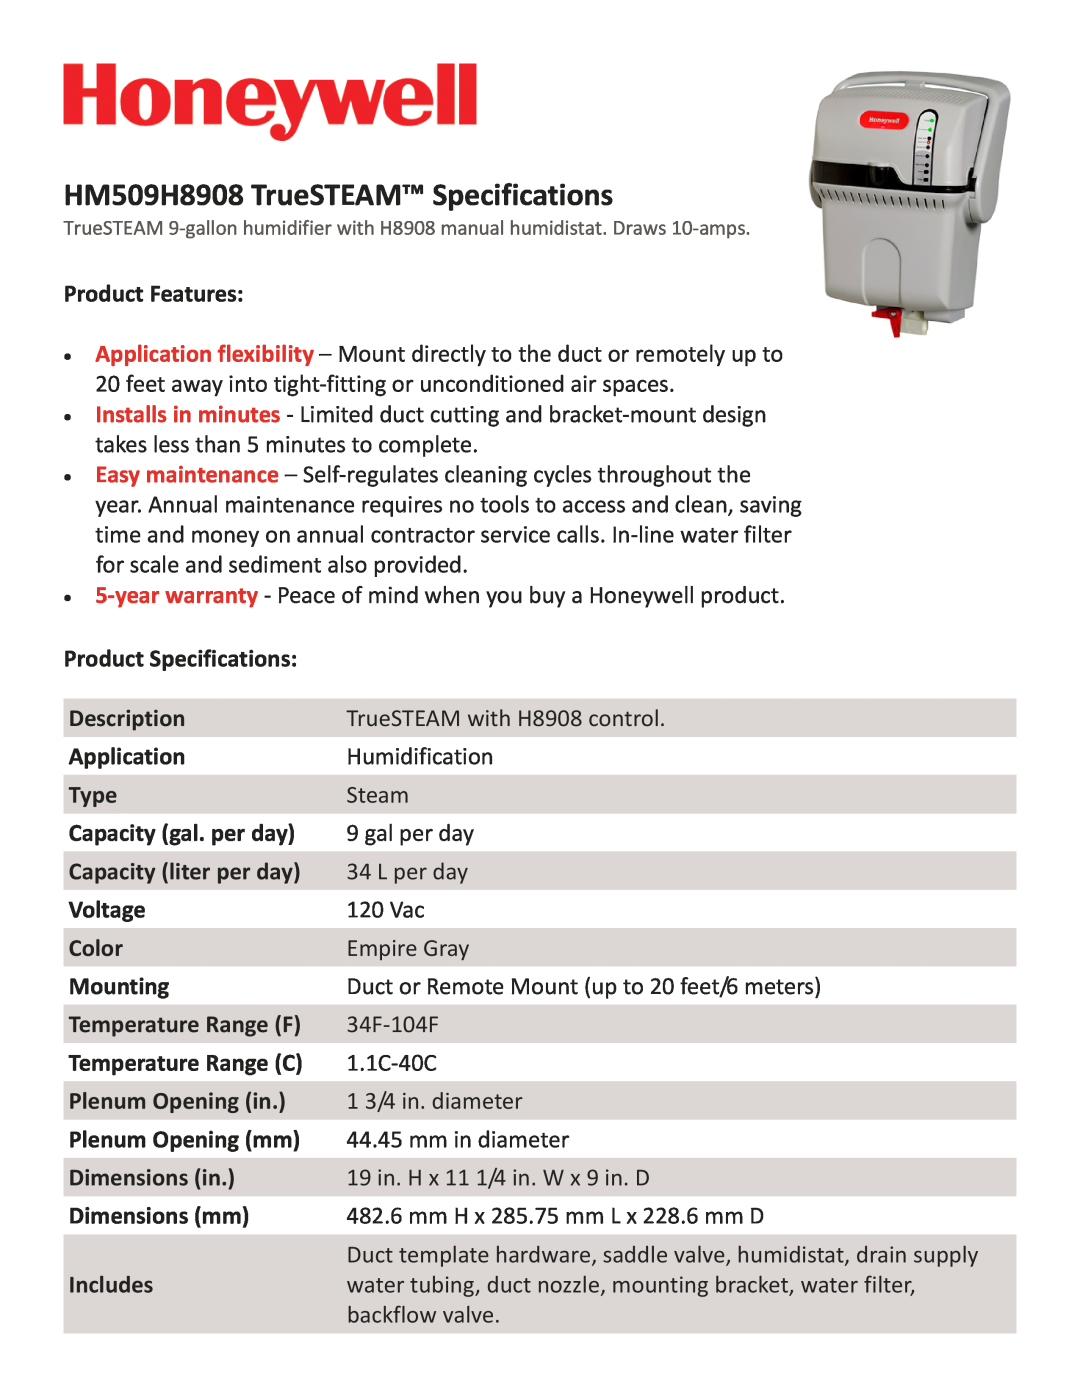 Honeywell HM506H8908 specifications HM509H8908 TrueSTEAM Specifications 